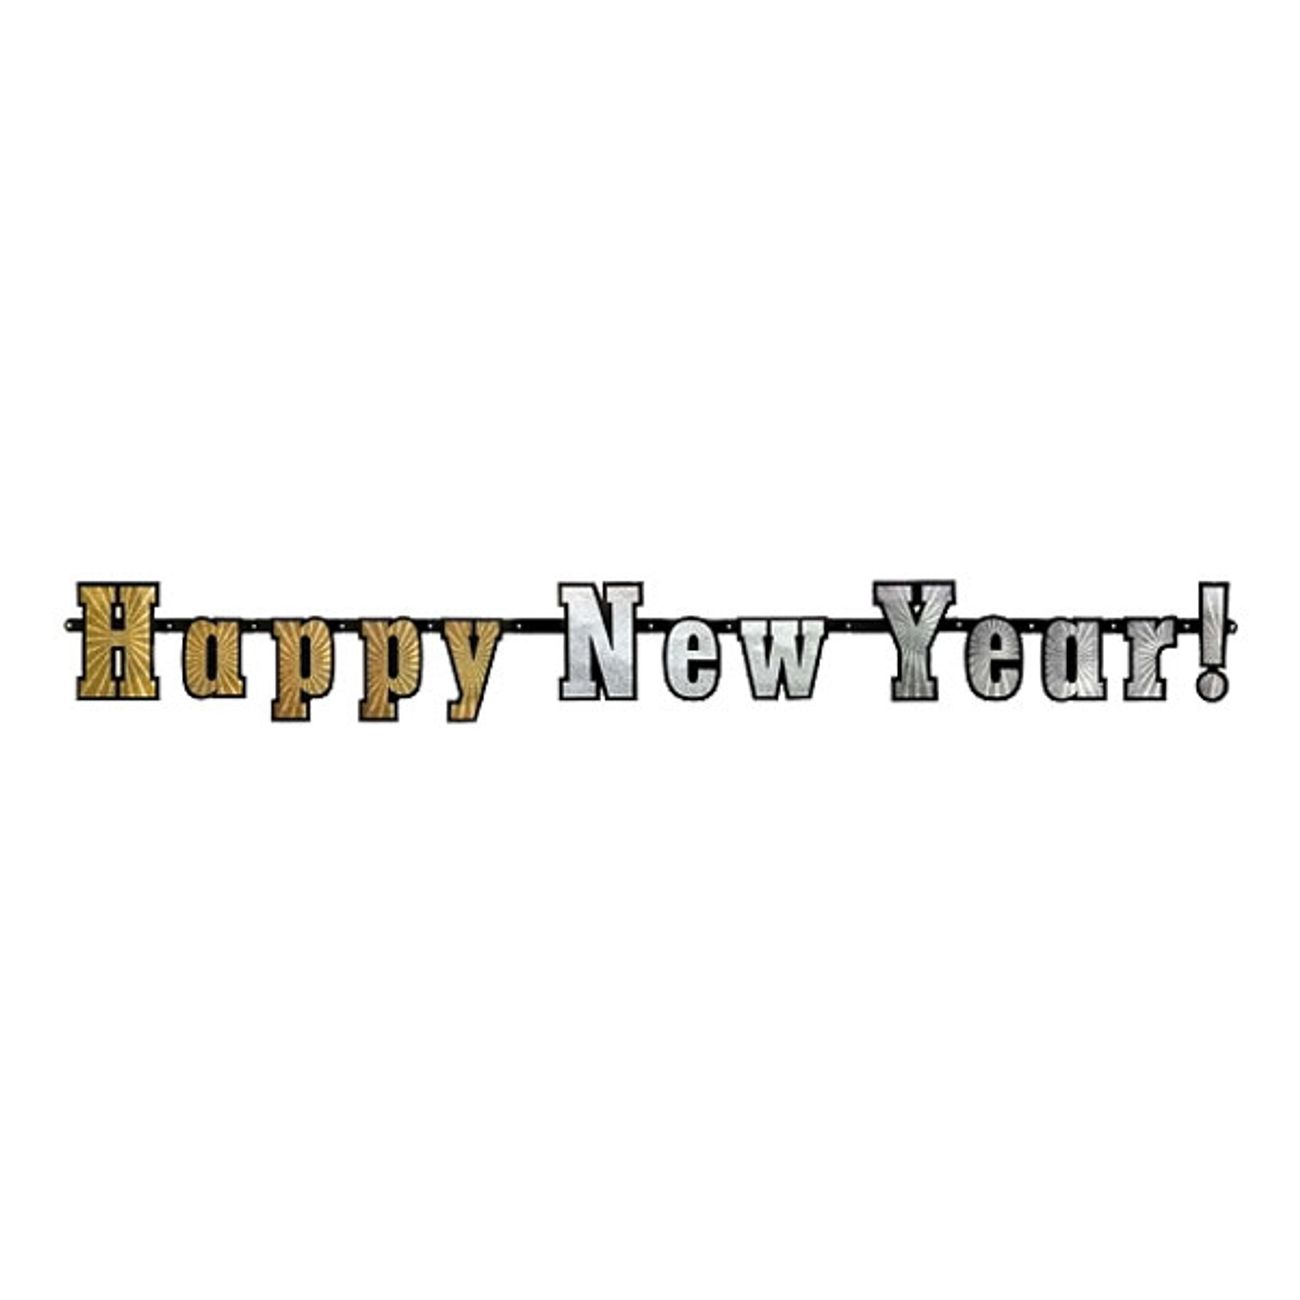 holografisk-banner-happy-new-year-1